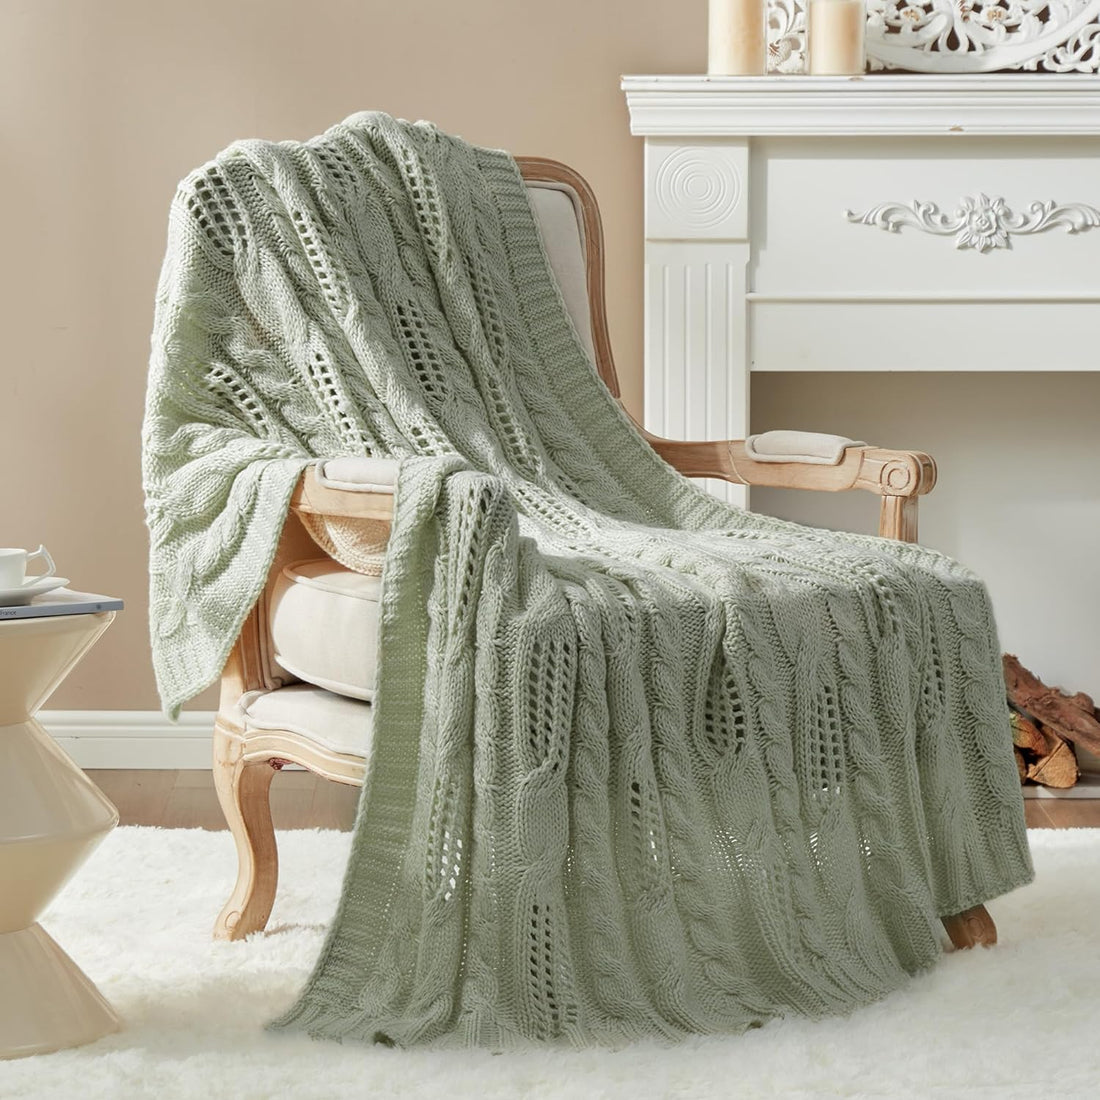 Sage Green Spring Throw Blanket Decorative Hollow Cable Knit Throw Blanket Soft Cozy Lightweight Farmhouse Throw Blankets for Couch Sofa Bedroom 50 X 60